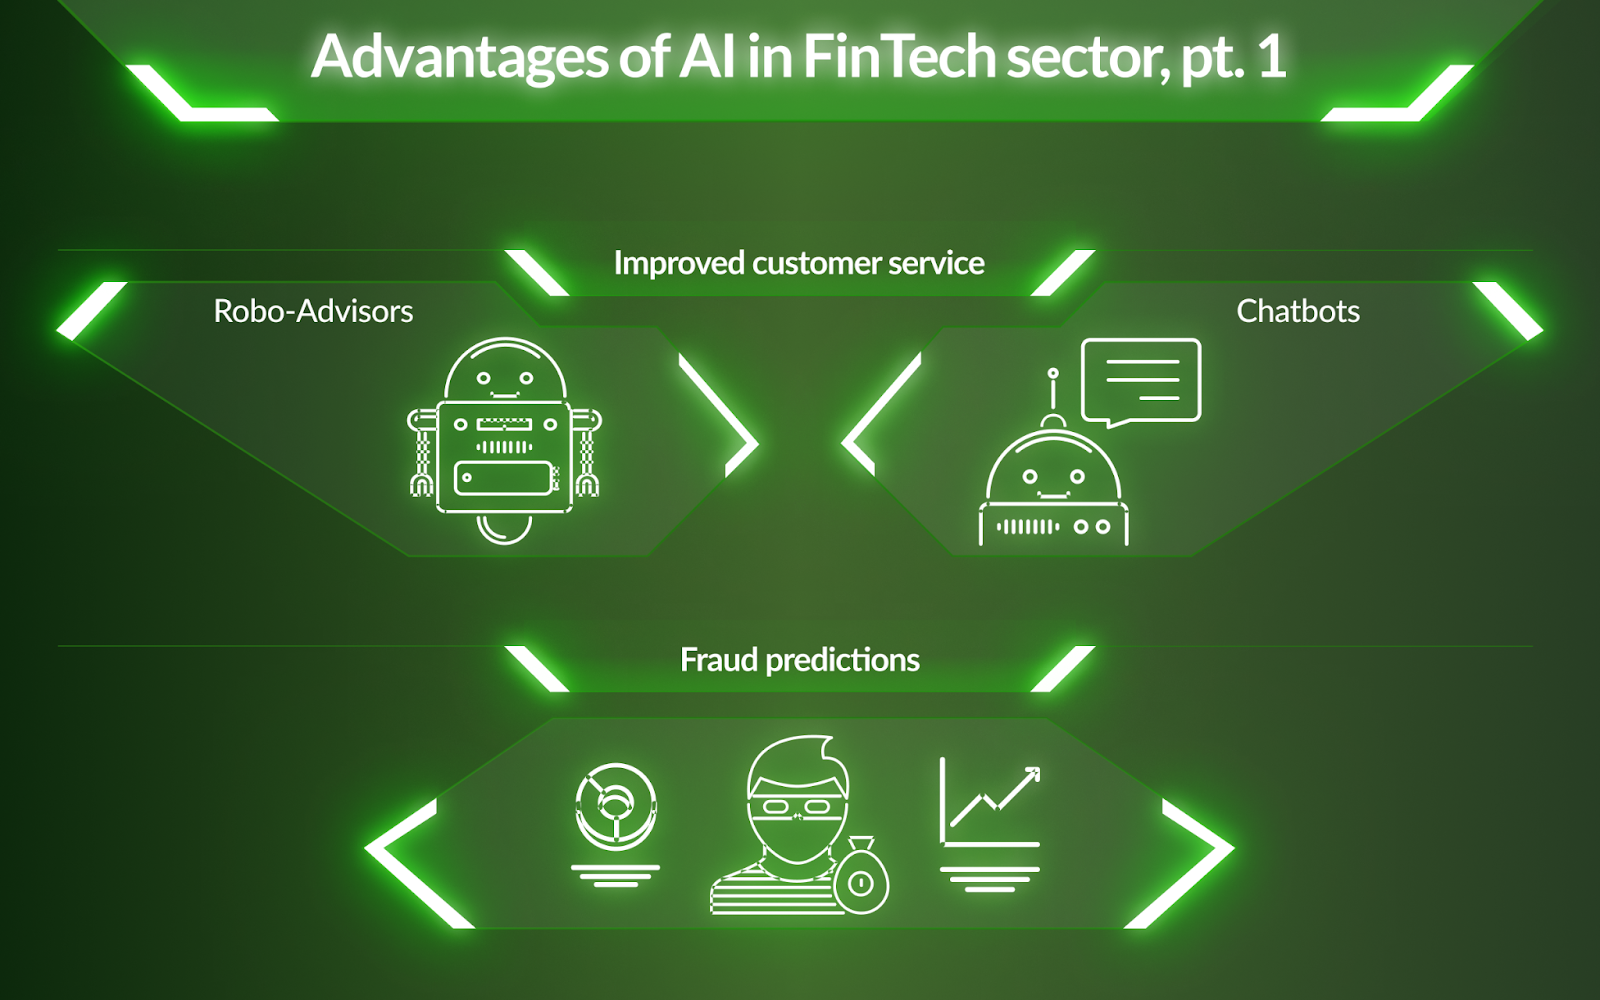 Advantages of ai in the FinTech sector, pt.1